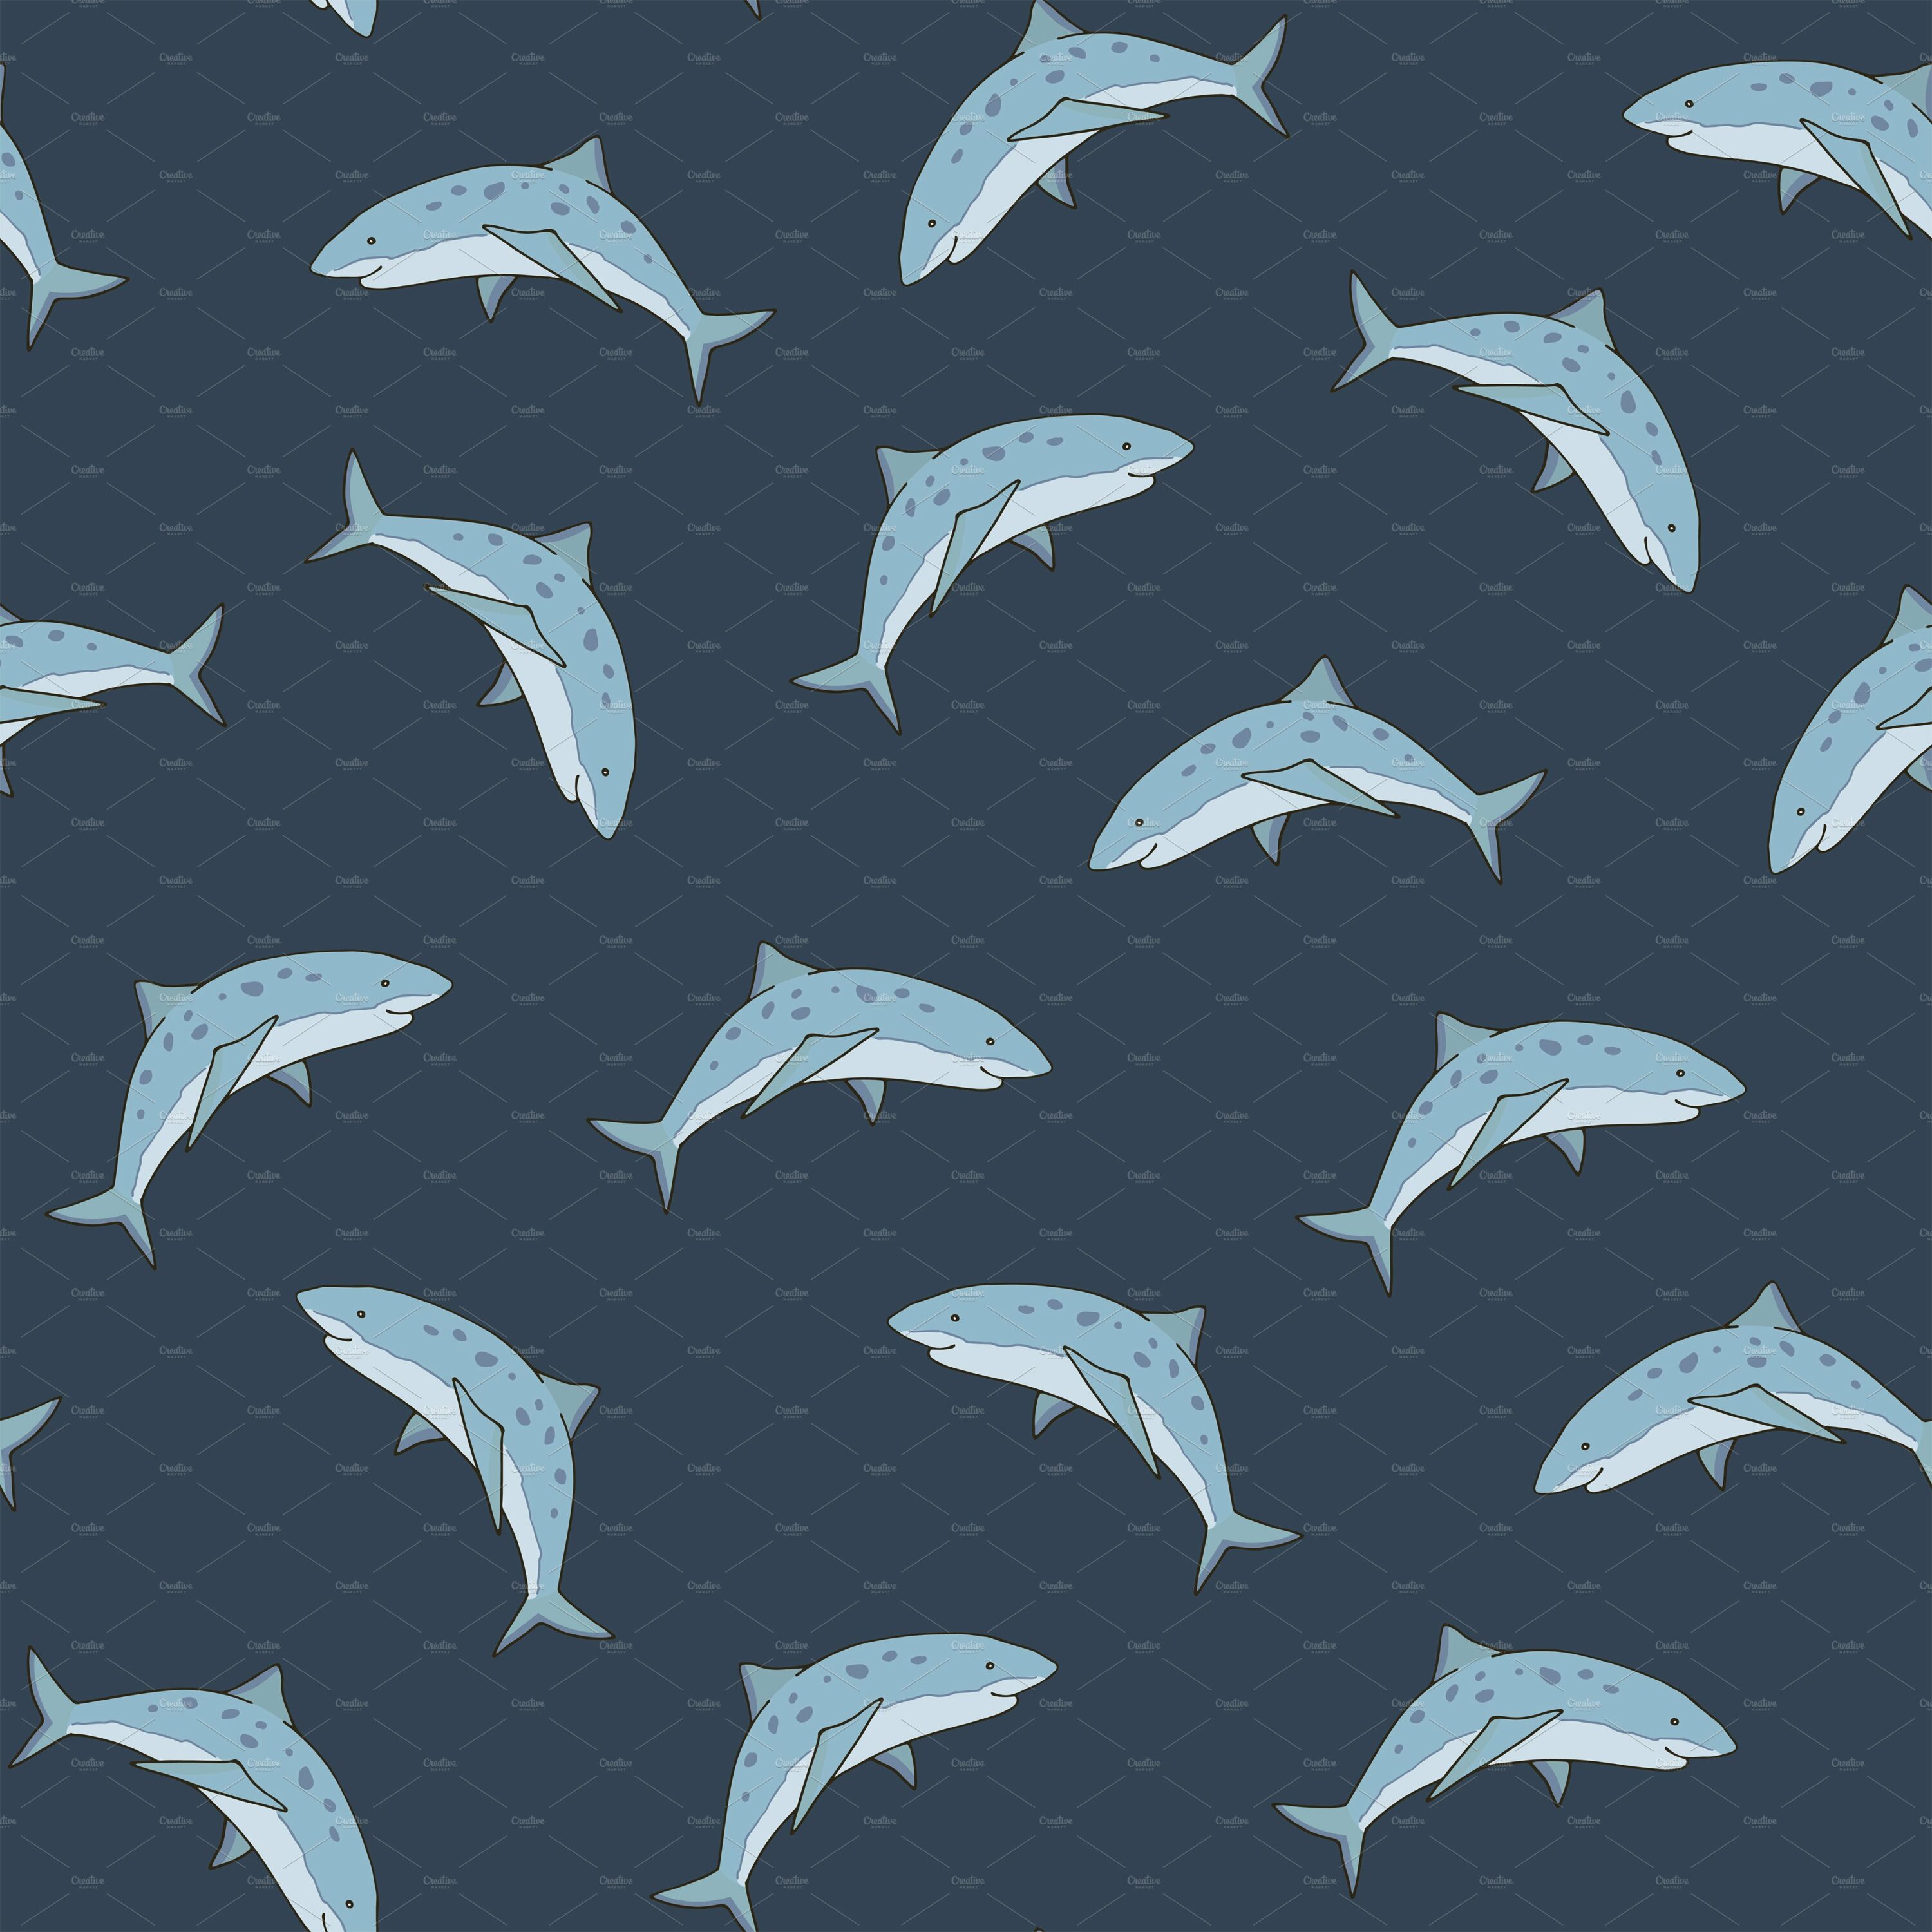 Dark blue background with the light blue sharks.